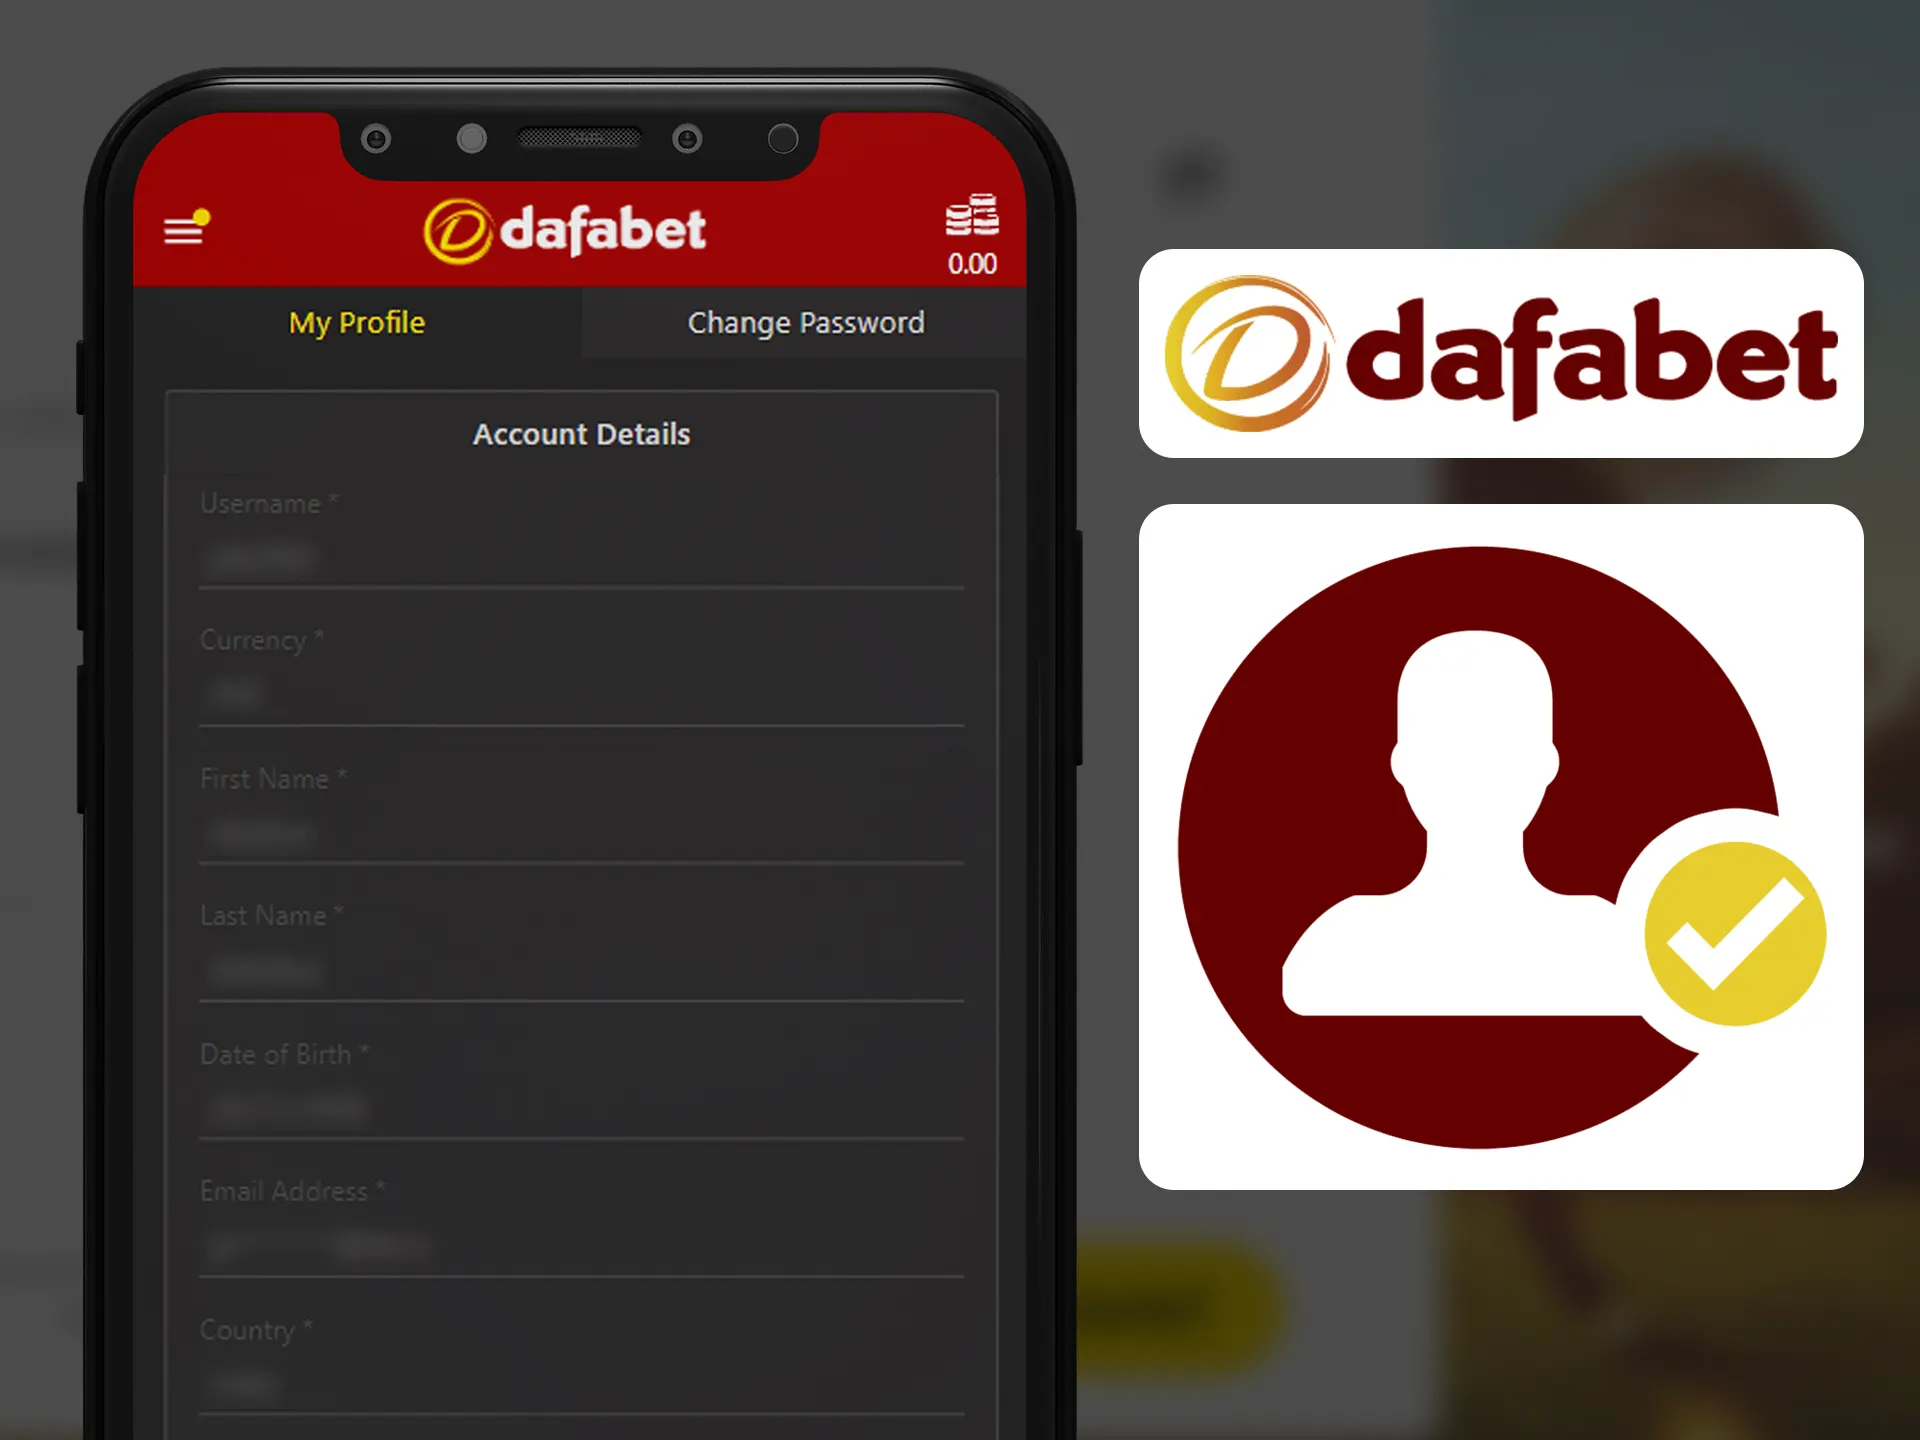 Verify your Dafabet account after succesfull registration.